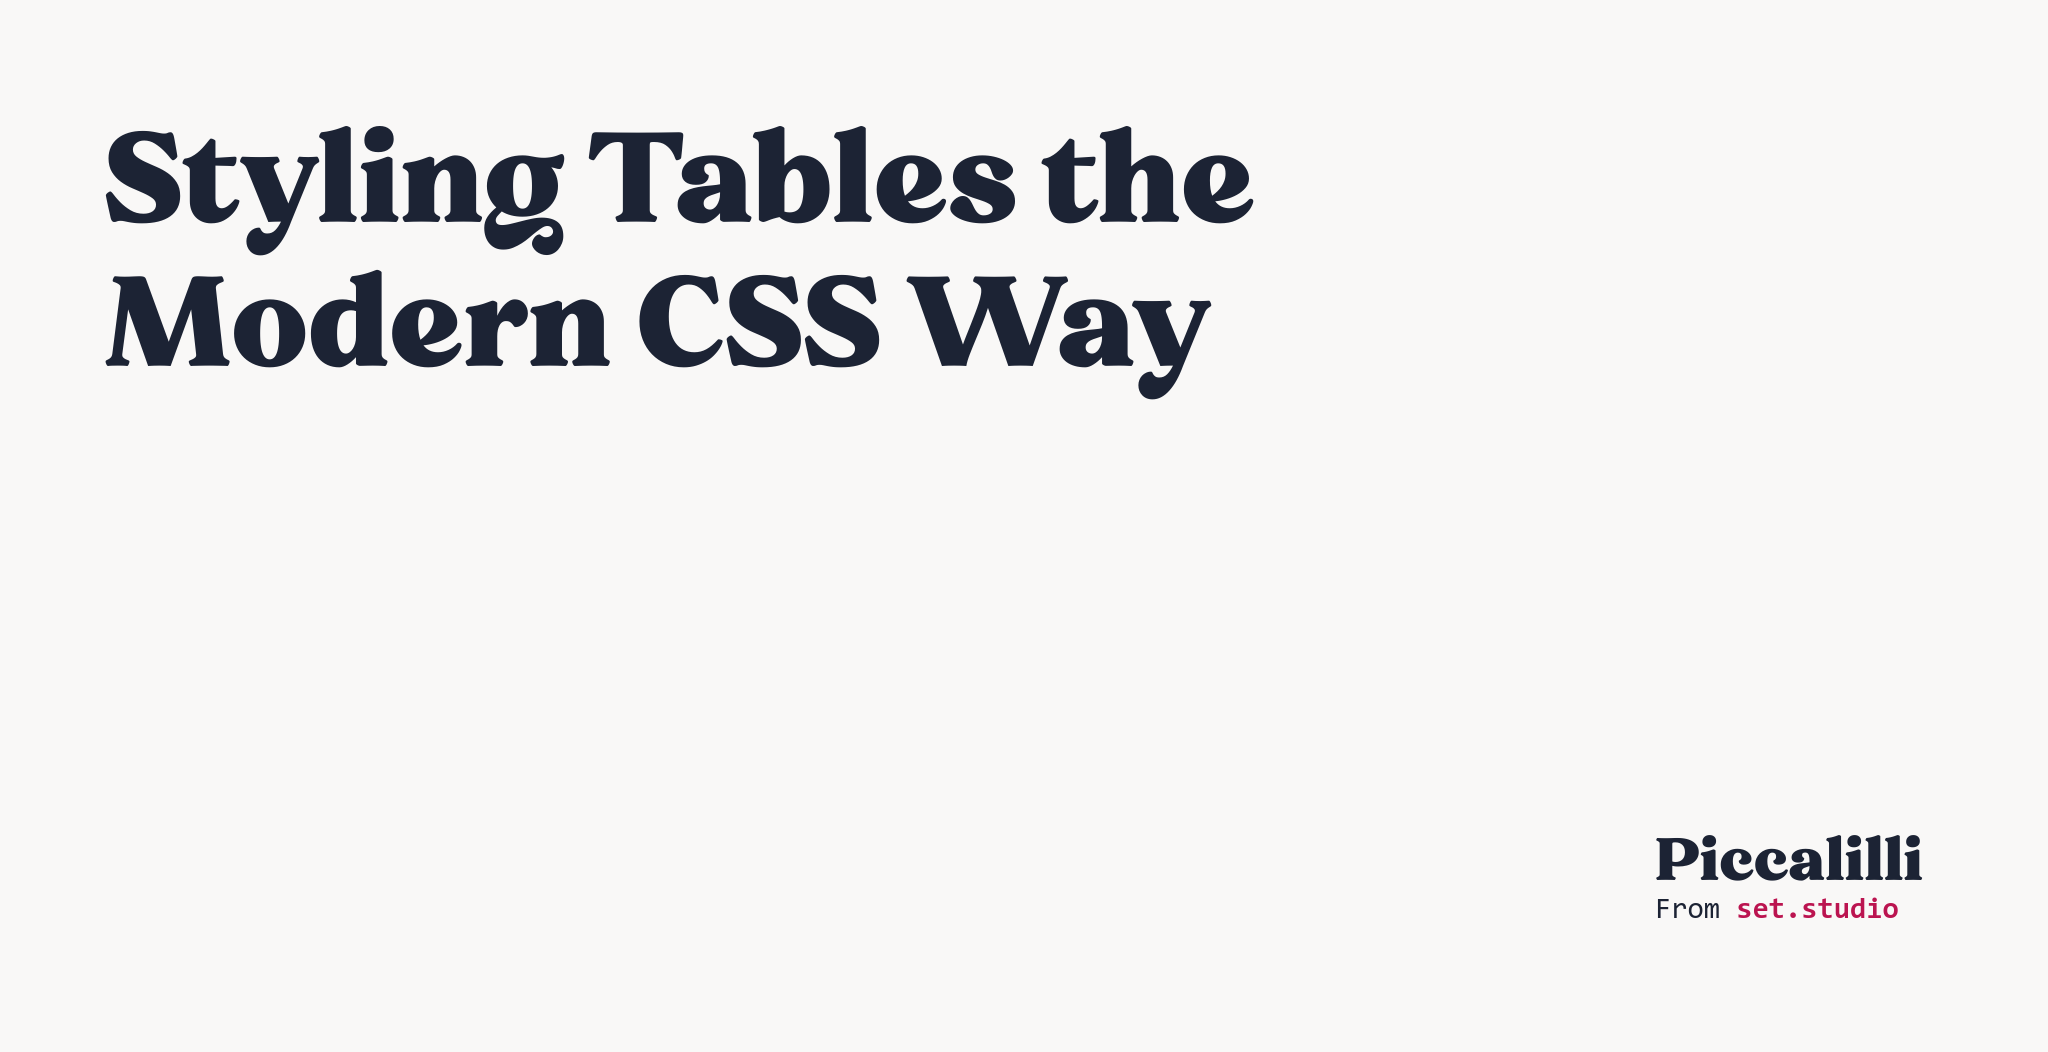 Styling Tables the Modern CSS Way